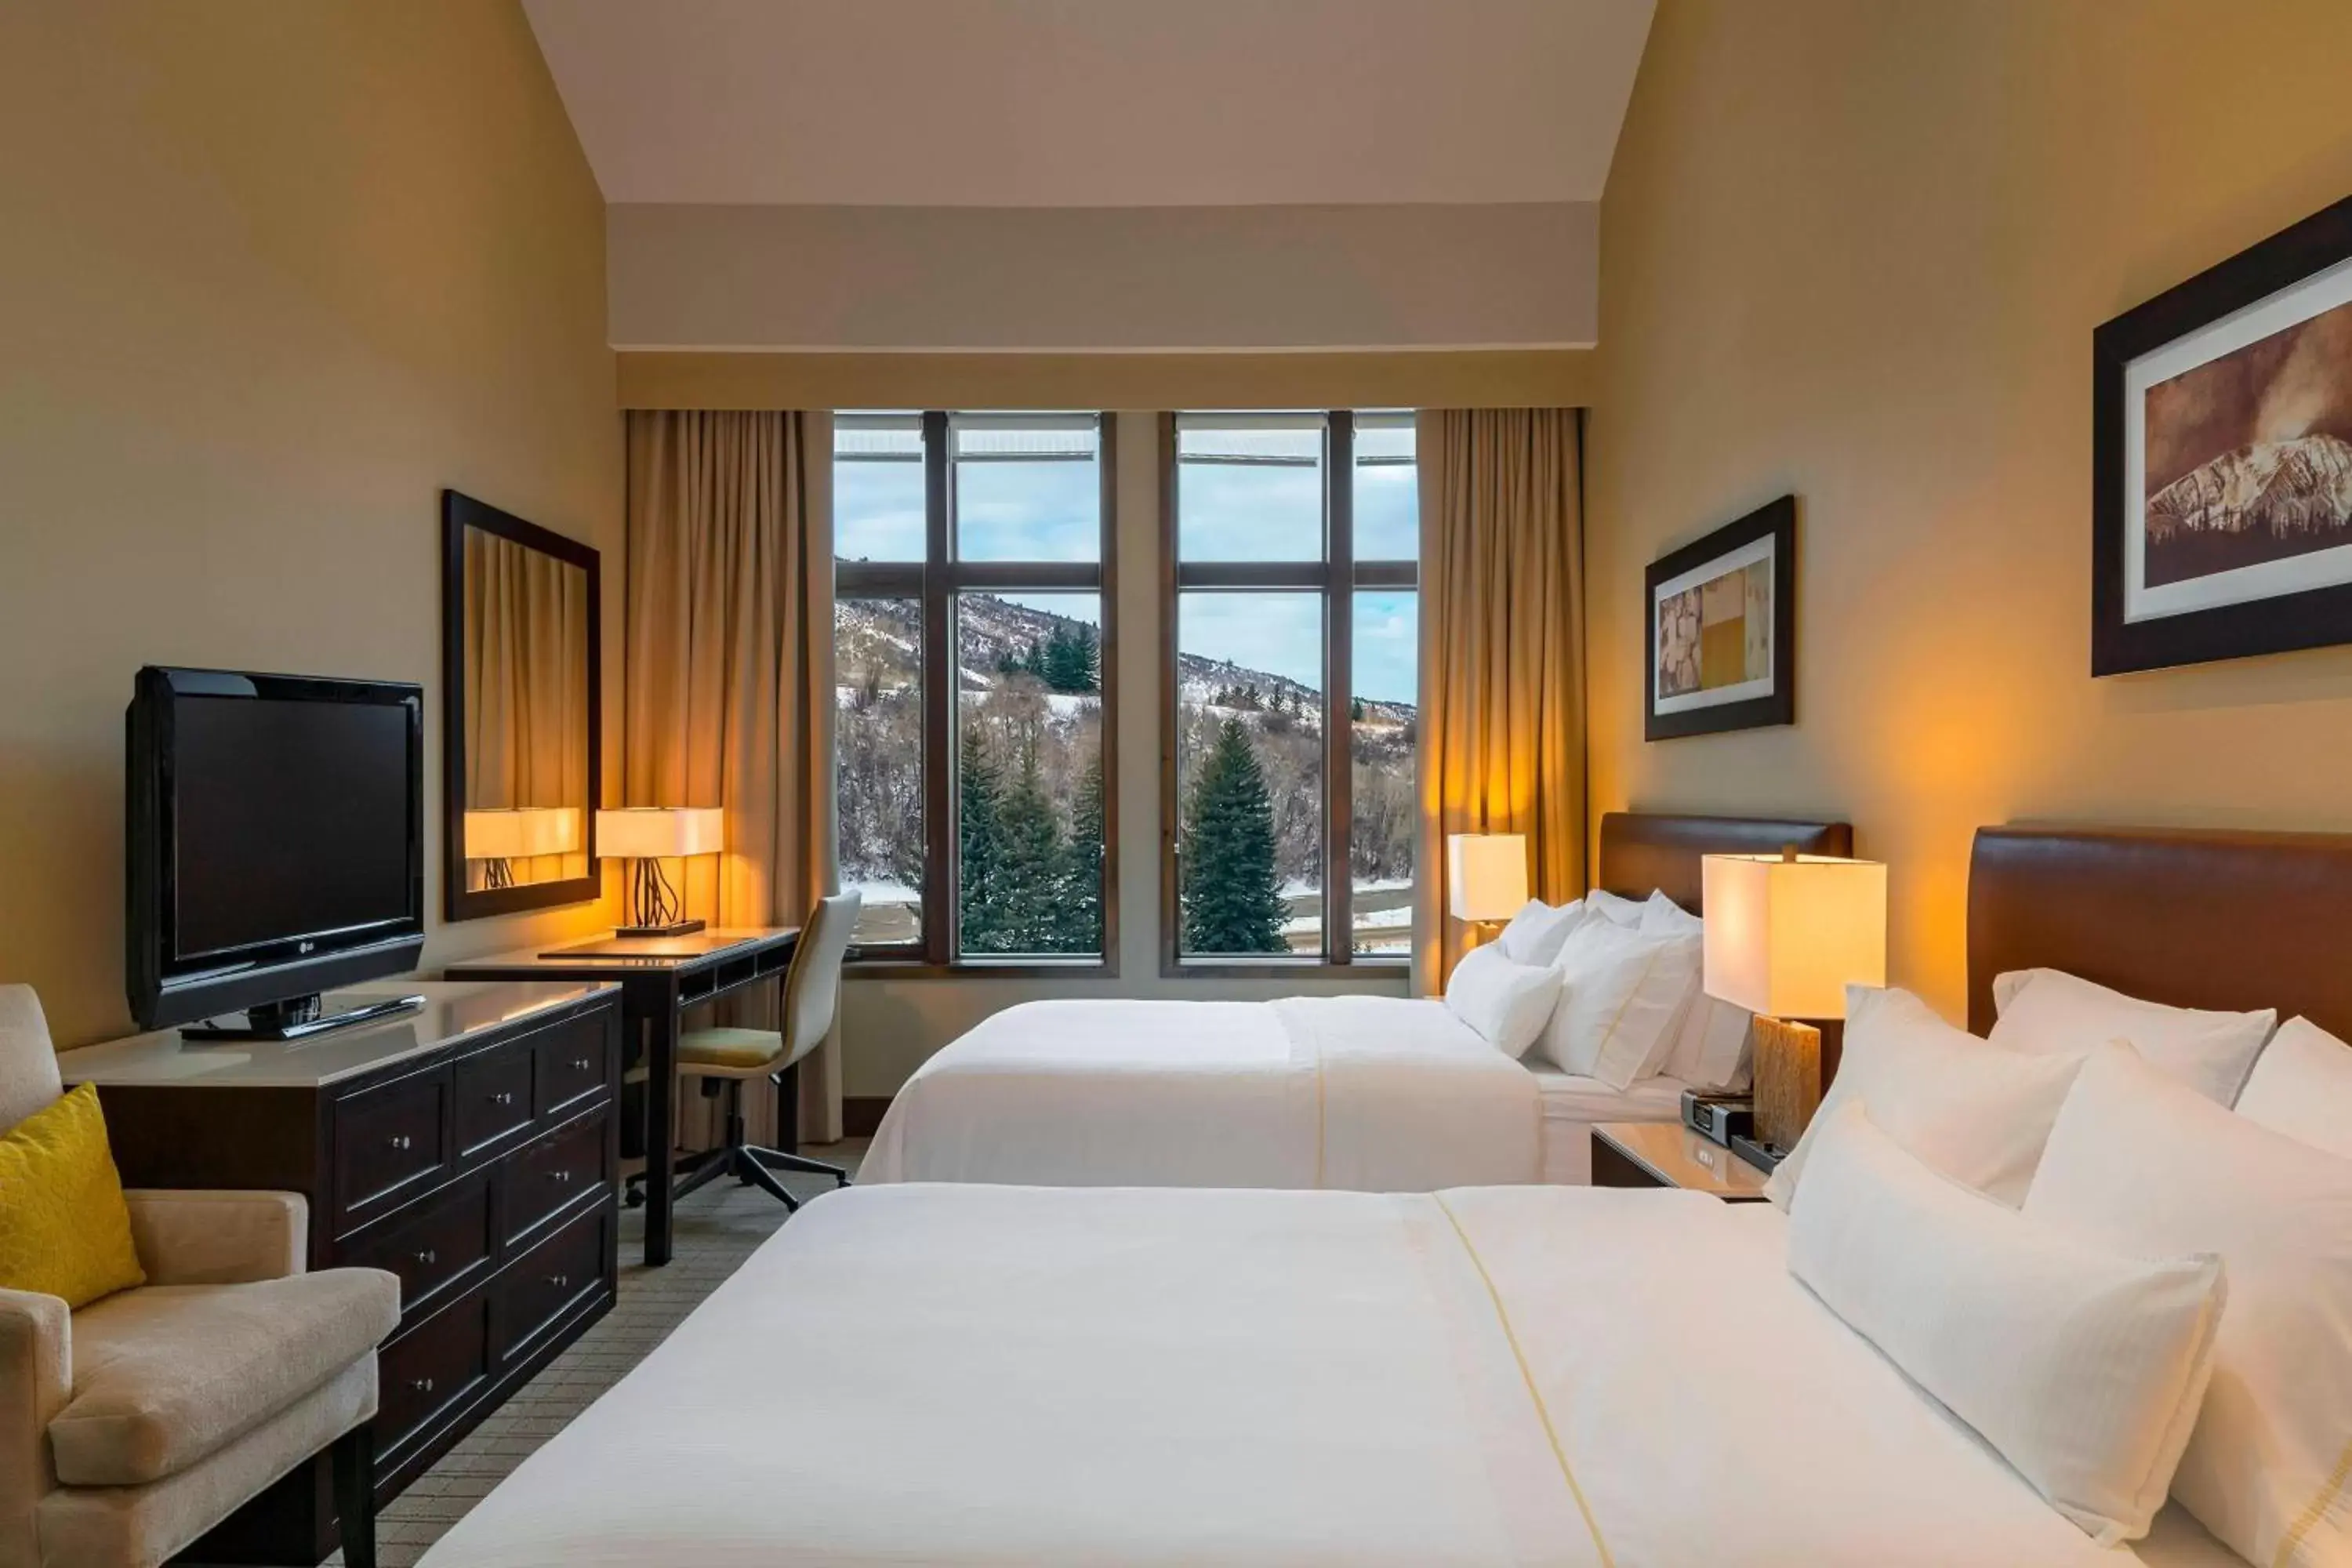 Bedroom in The Westin Riverfront Resort & Spa, Avon, Vail Valley